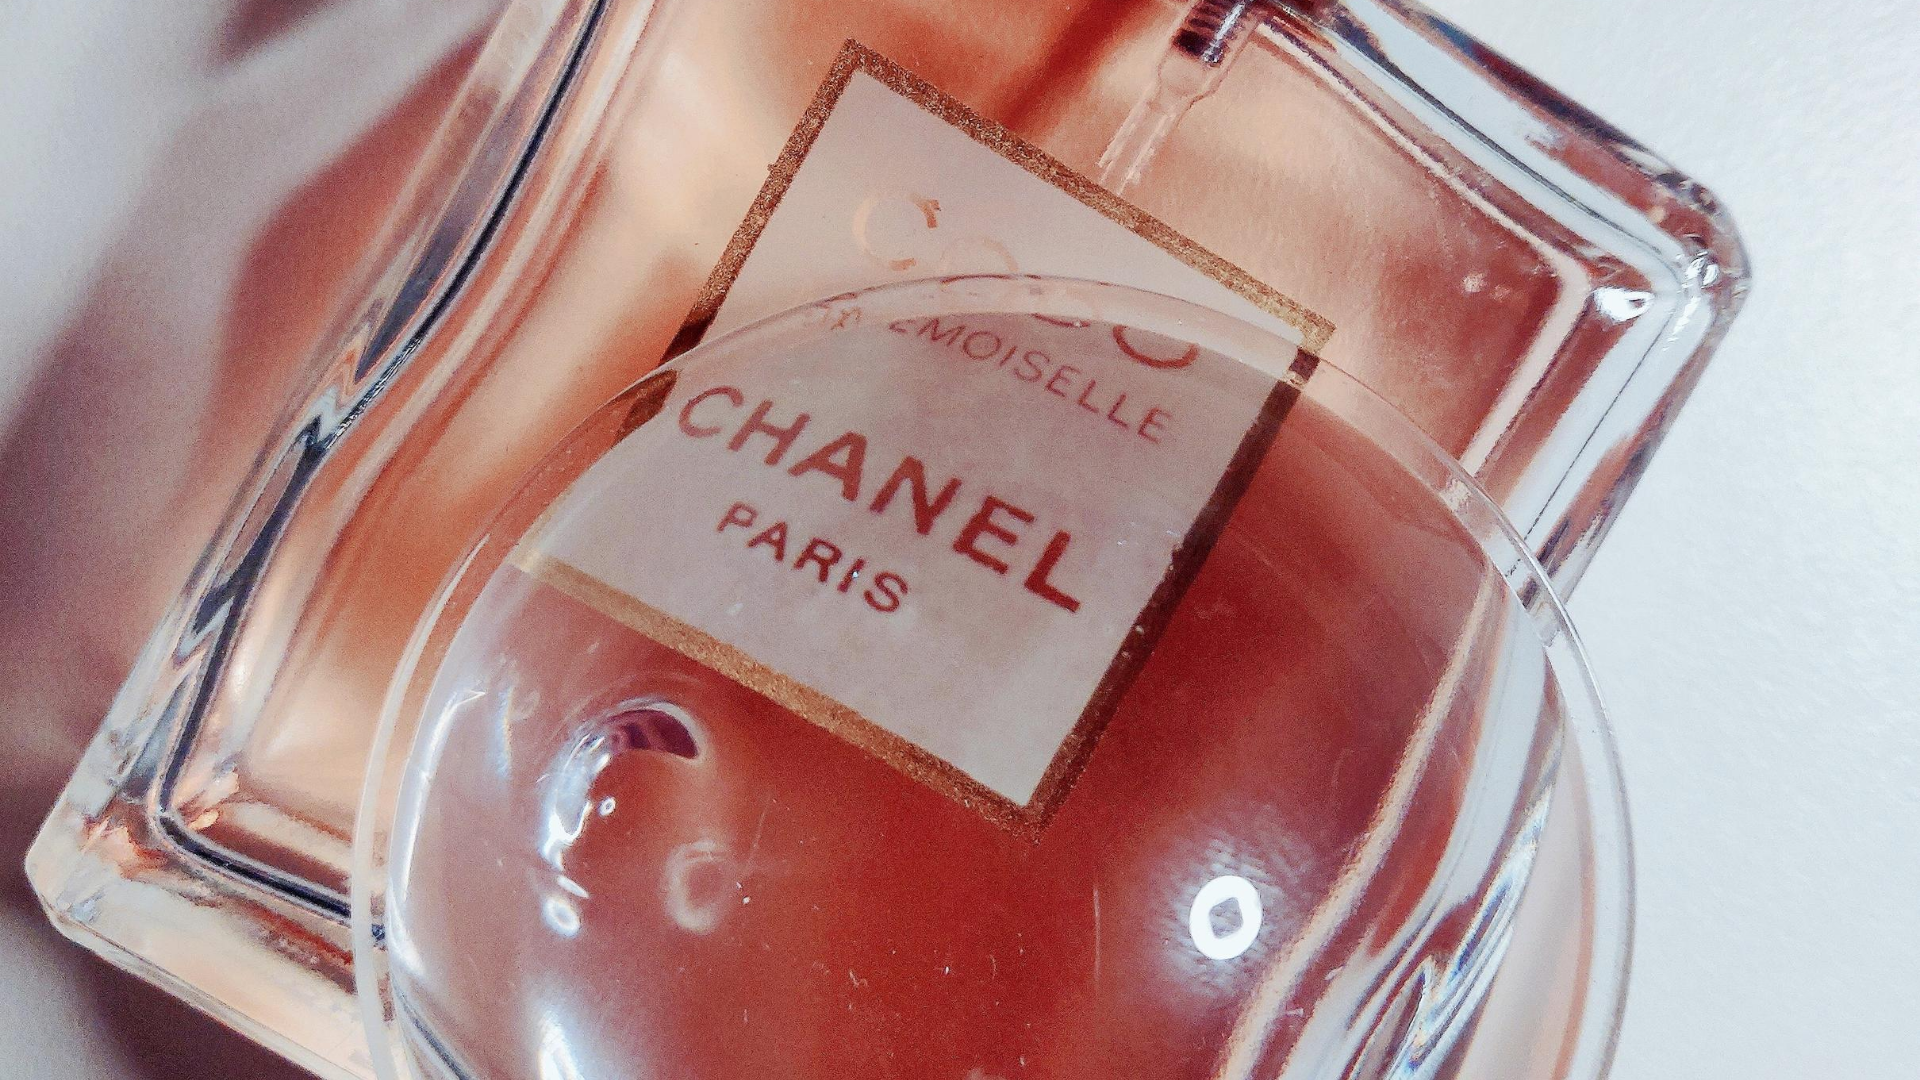 Deep dive into Chanel perfumes in Paris at their immersive beauty  experience till 9th January 2023